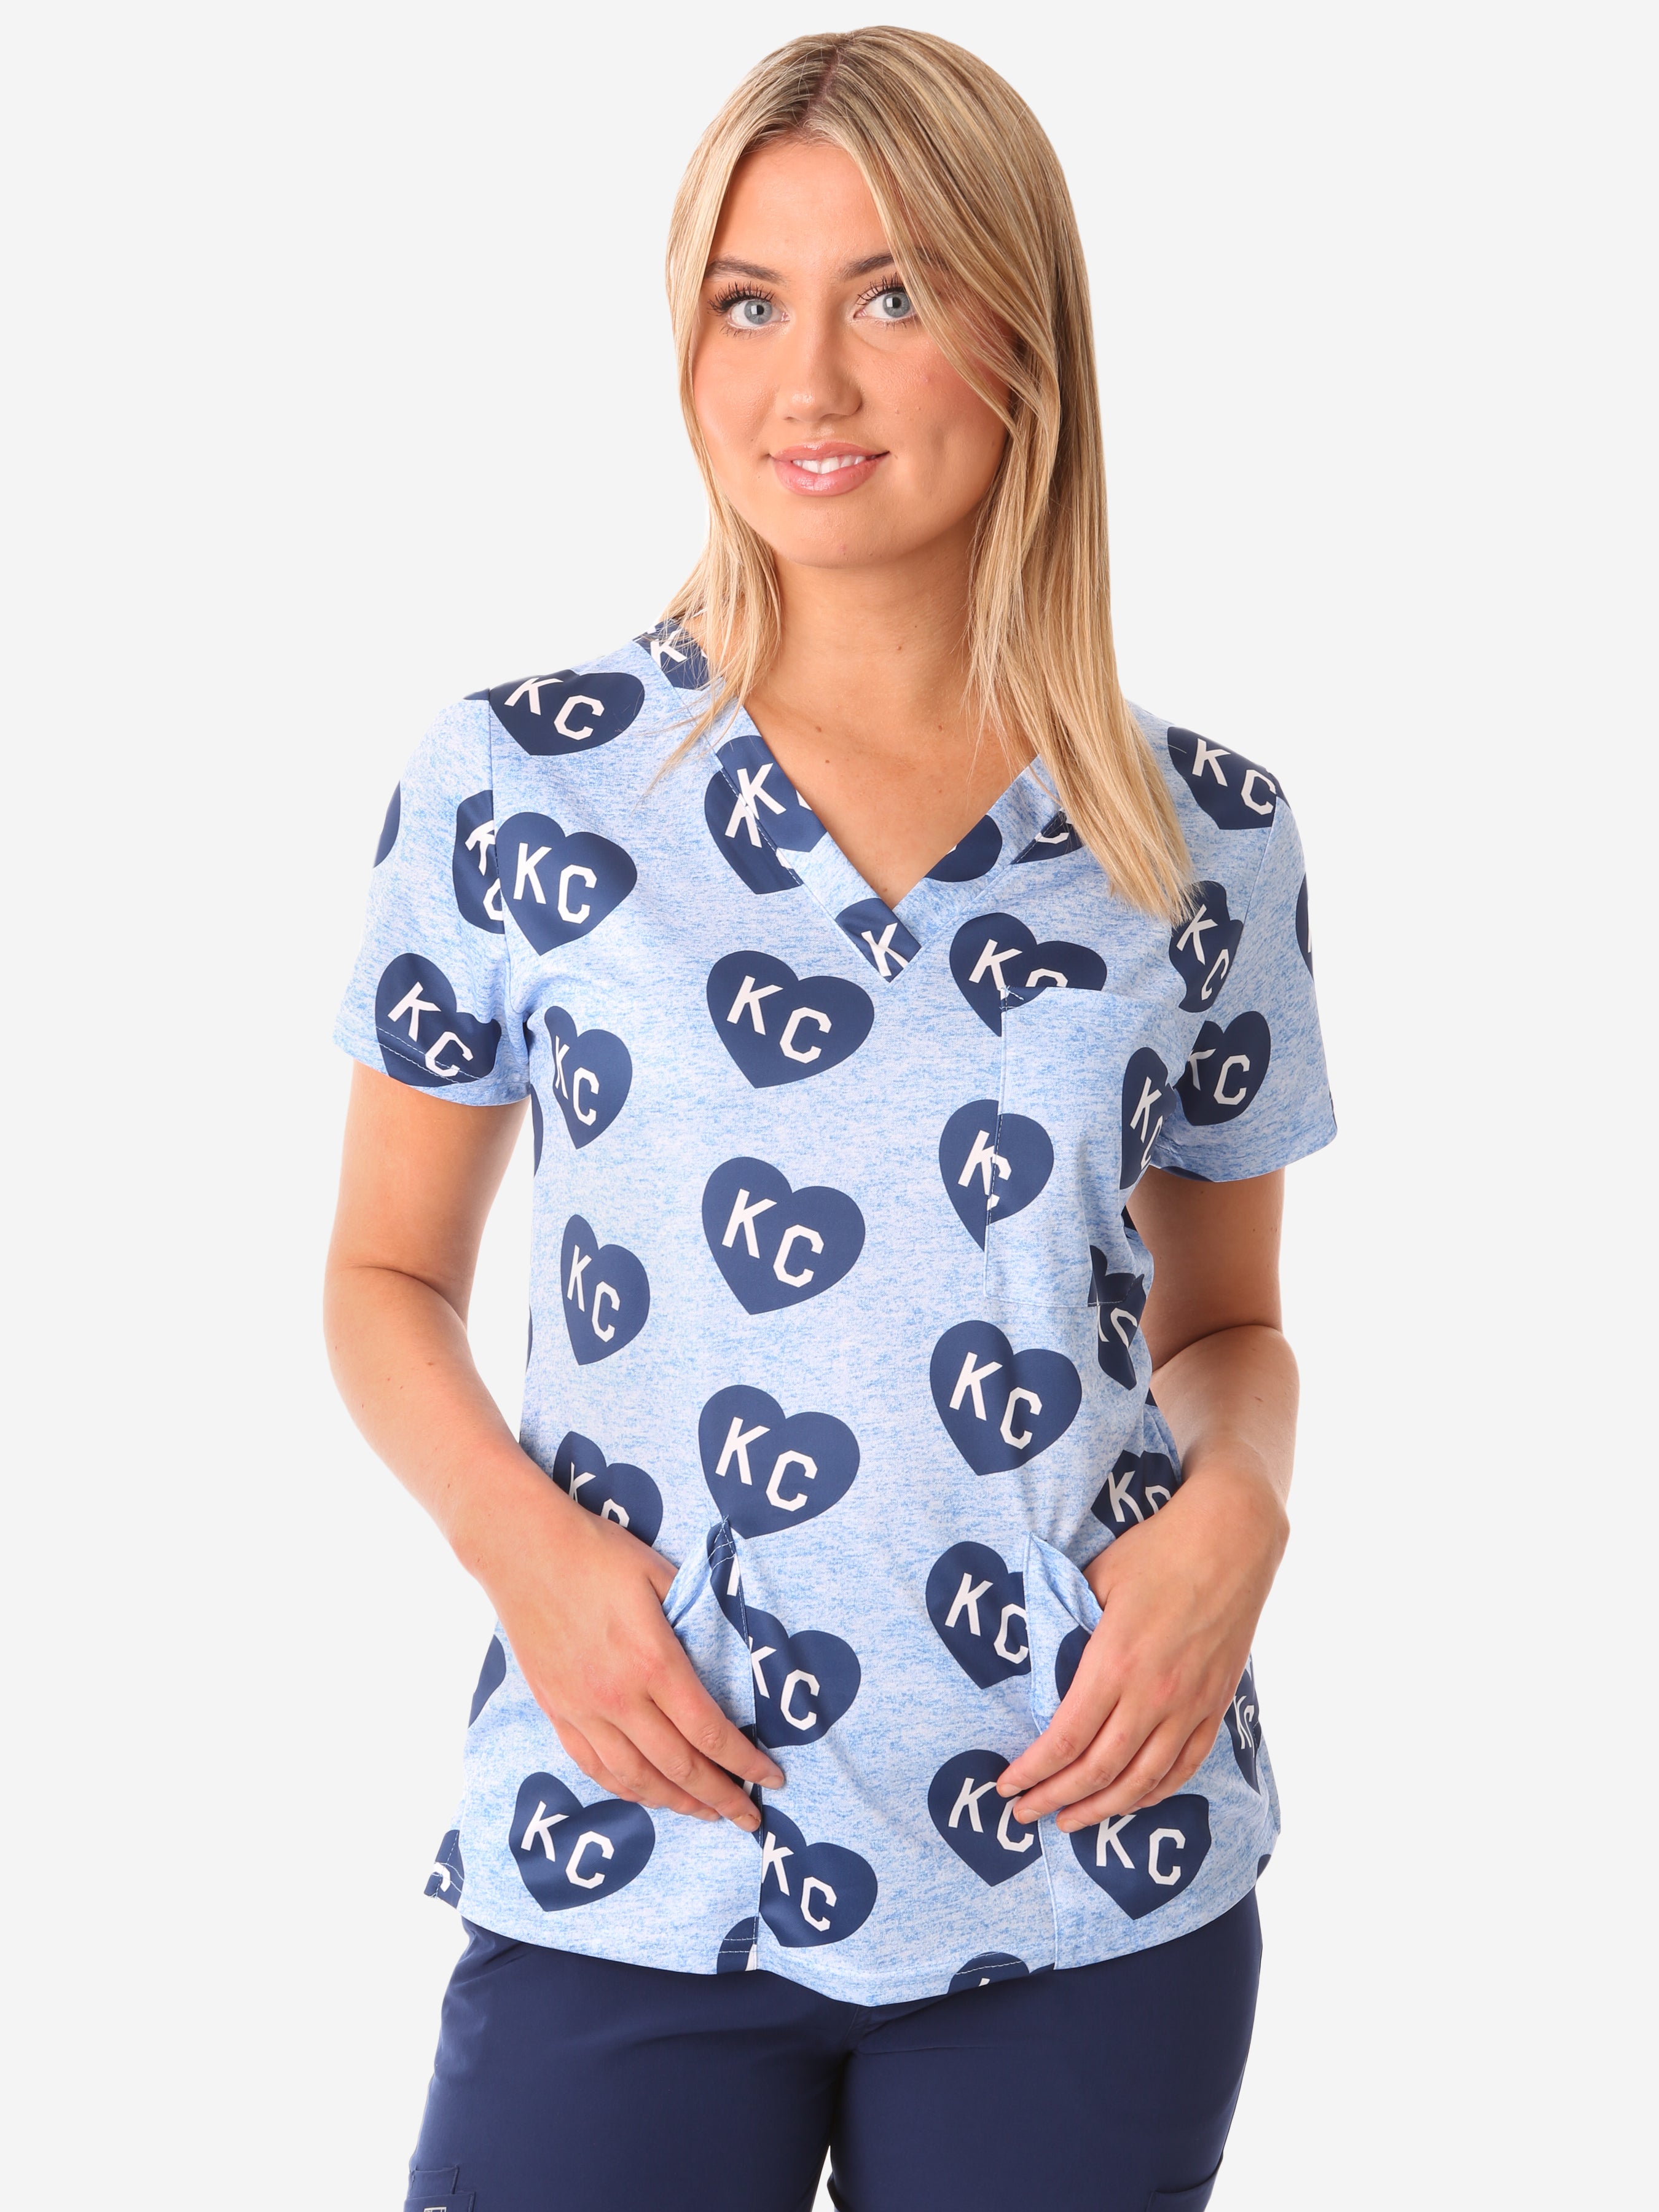 Women's Charlie Hustle Scrub Top All-Over KC Heart Design Three Pockets_Top Only_Front